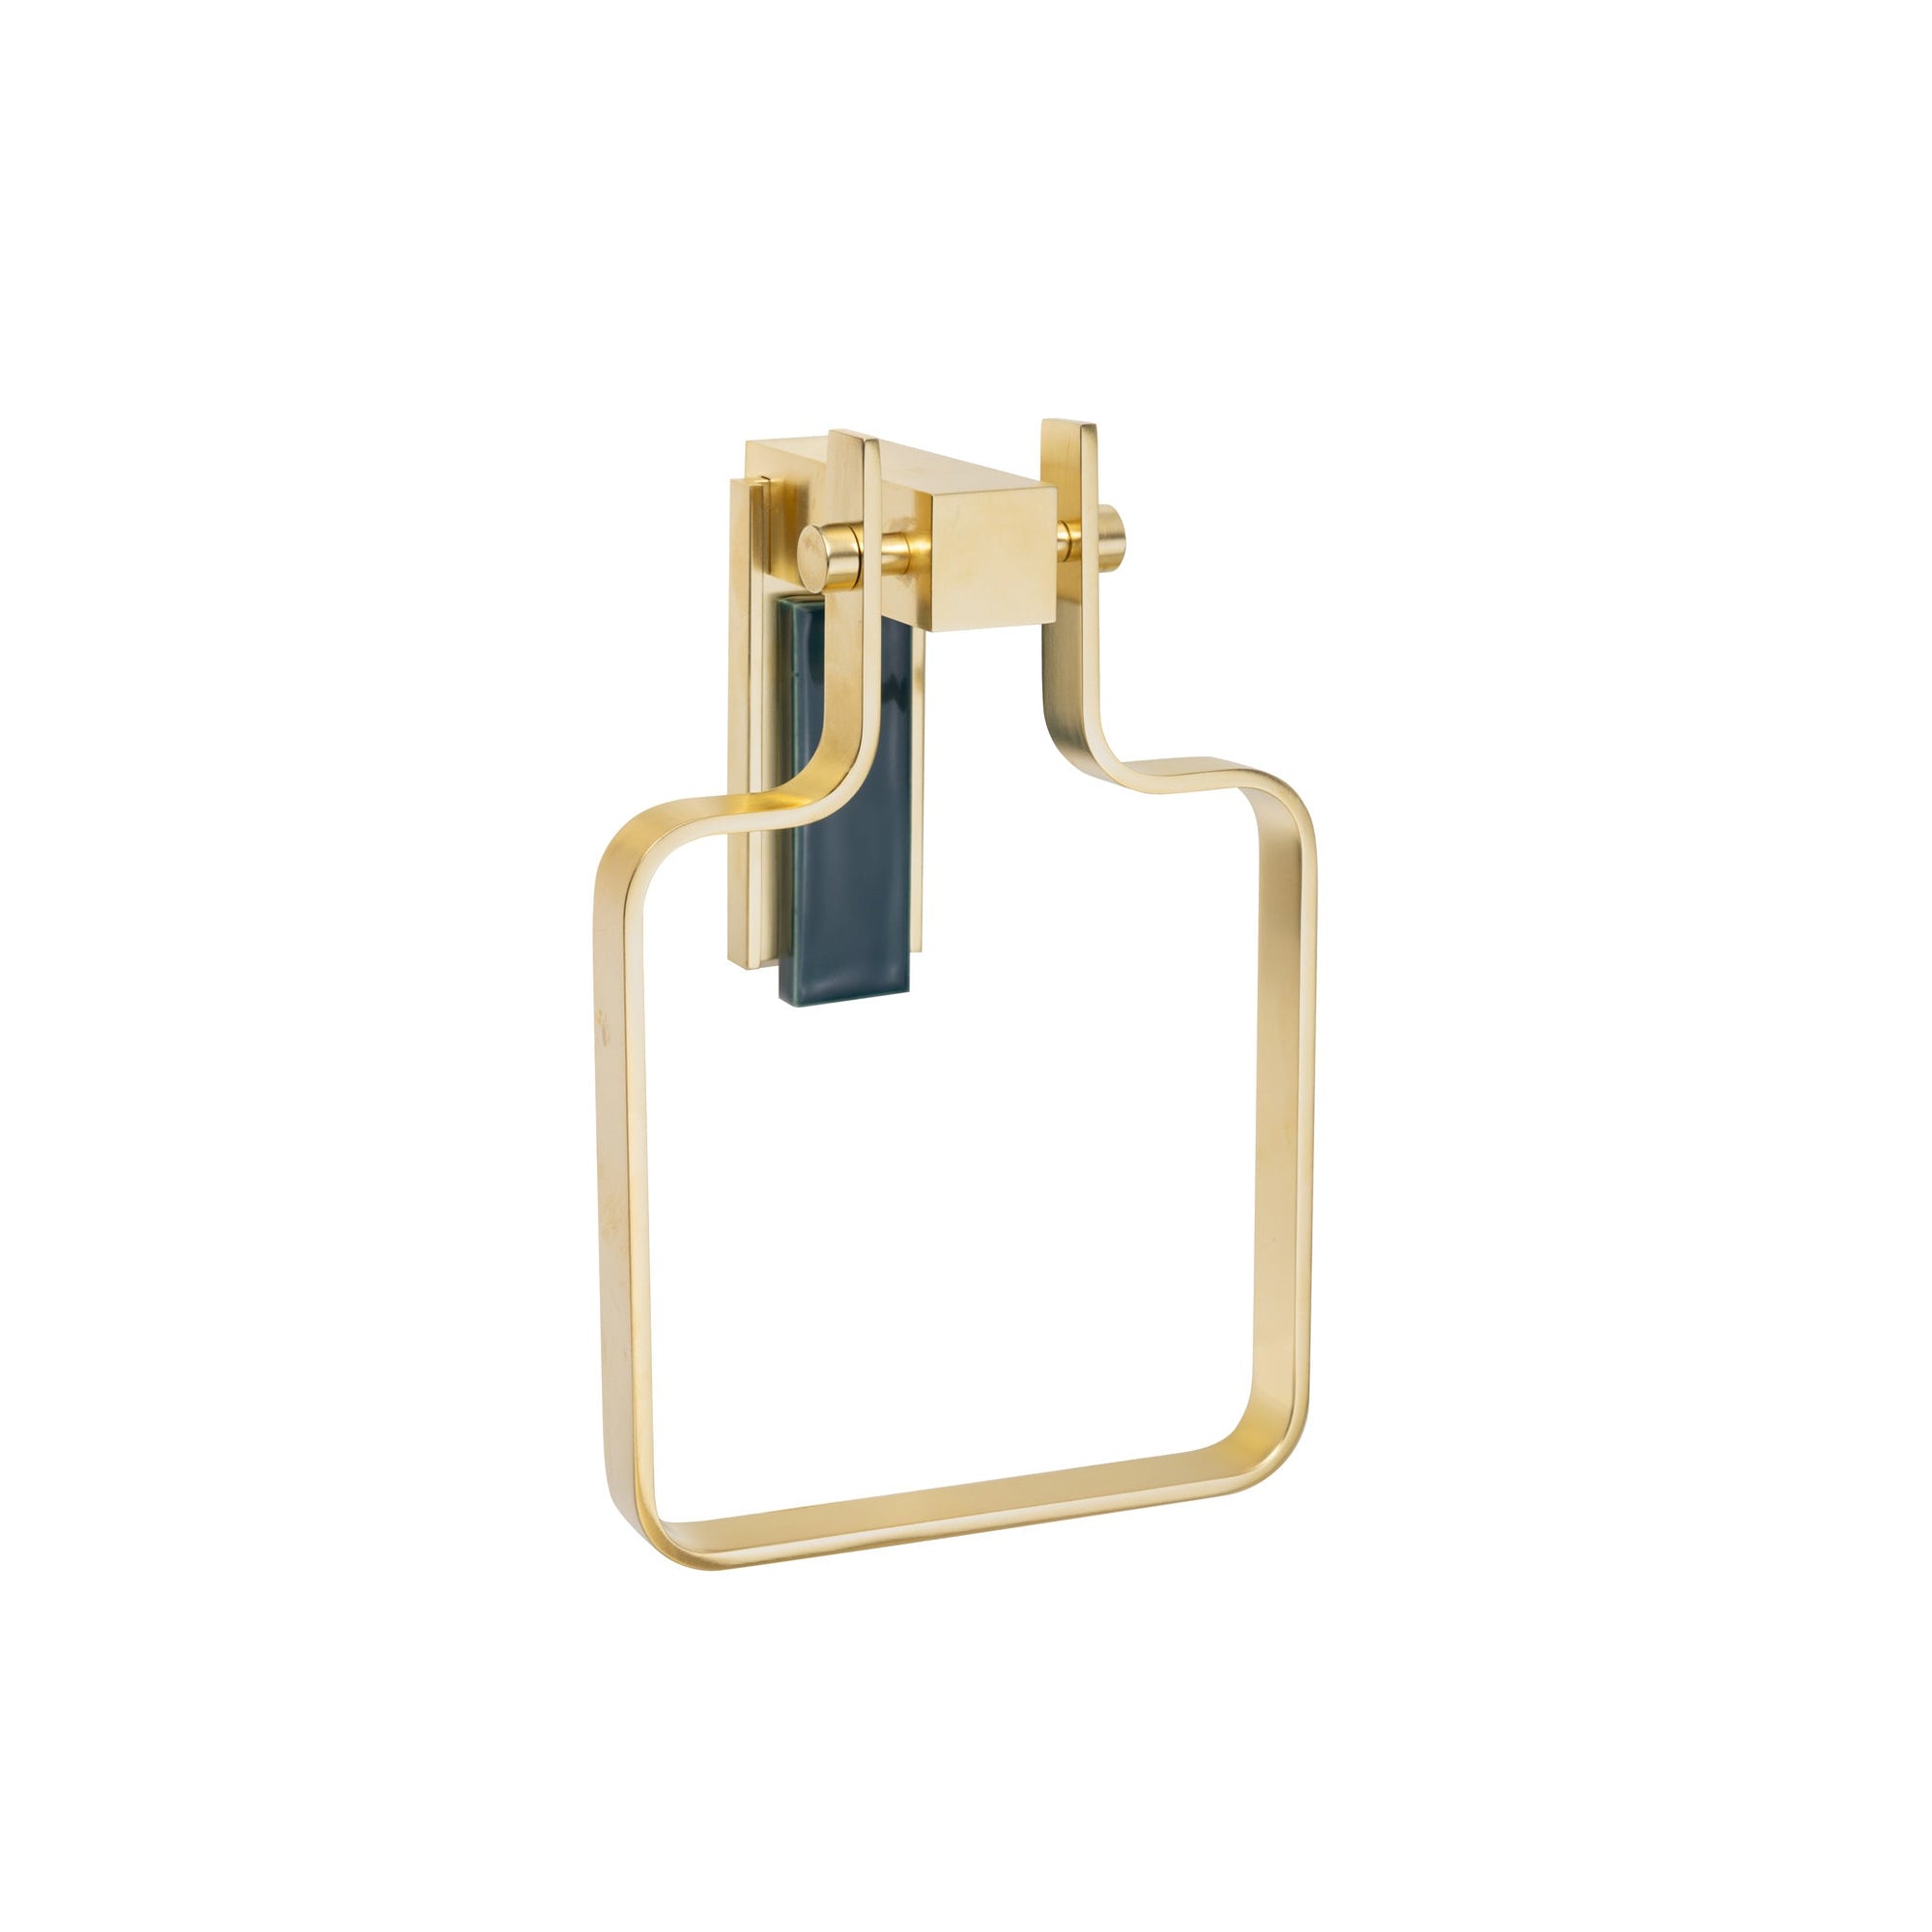 3456-GR03-SB Sherle Wagner International Apollo Towel Ring with Blue Spruce insert in Satin Brass metal finish